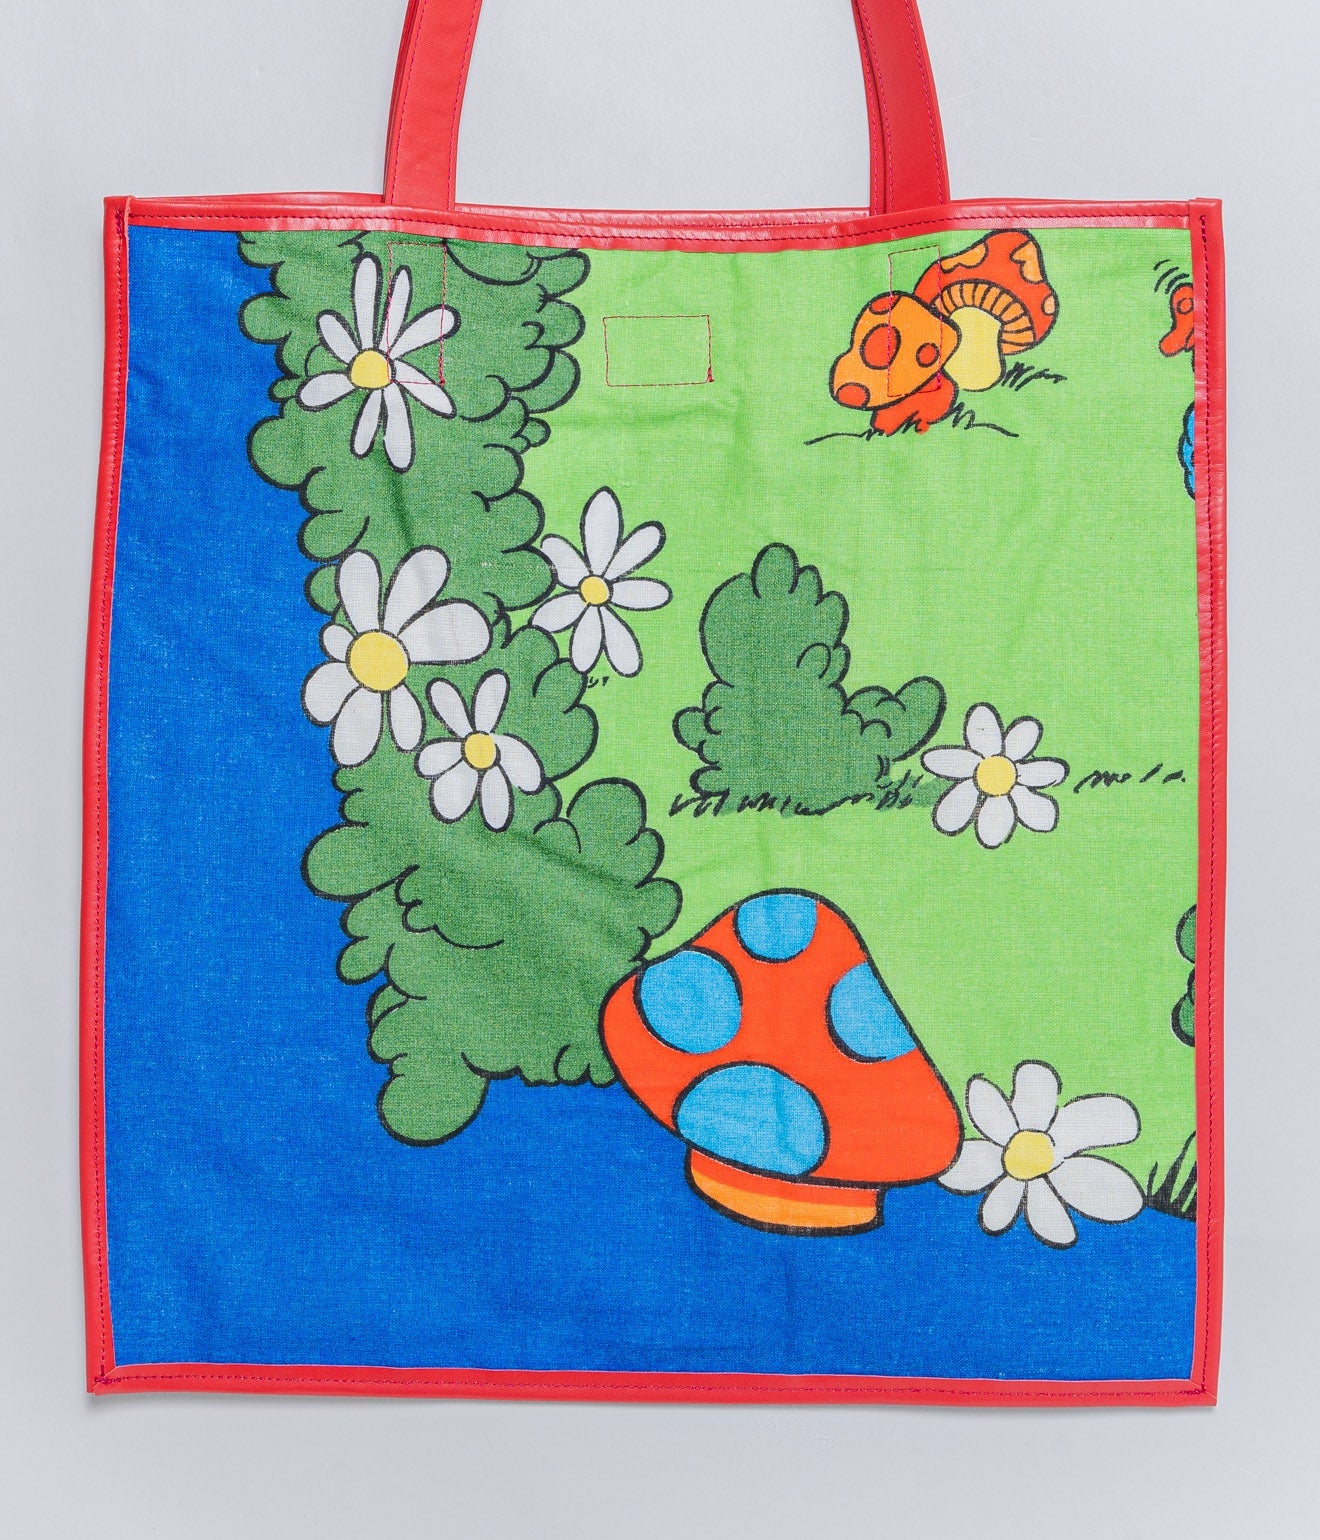 WEAREALLANIMALS UPCYCLE ”Piping Flat Tote -Vintage Smurf Fabric-" #3 - WEAREALLANIMALS